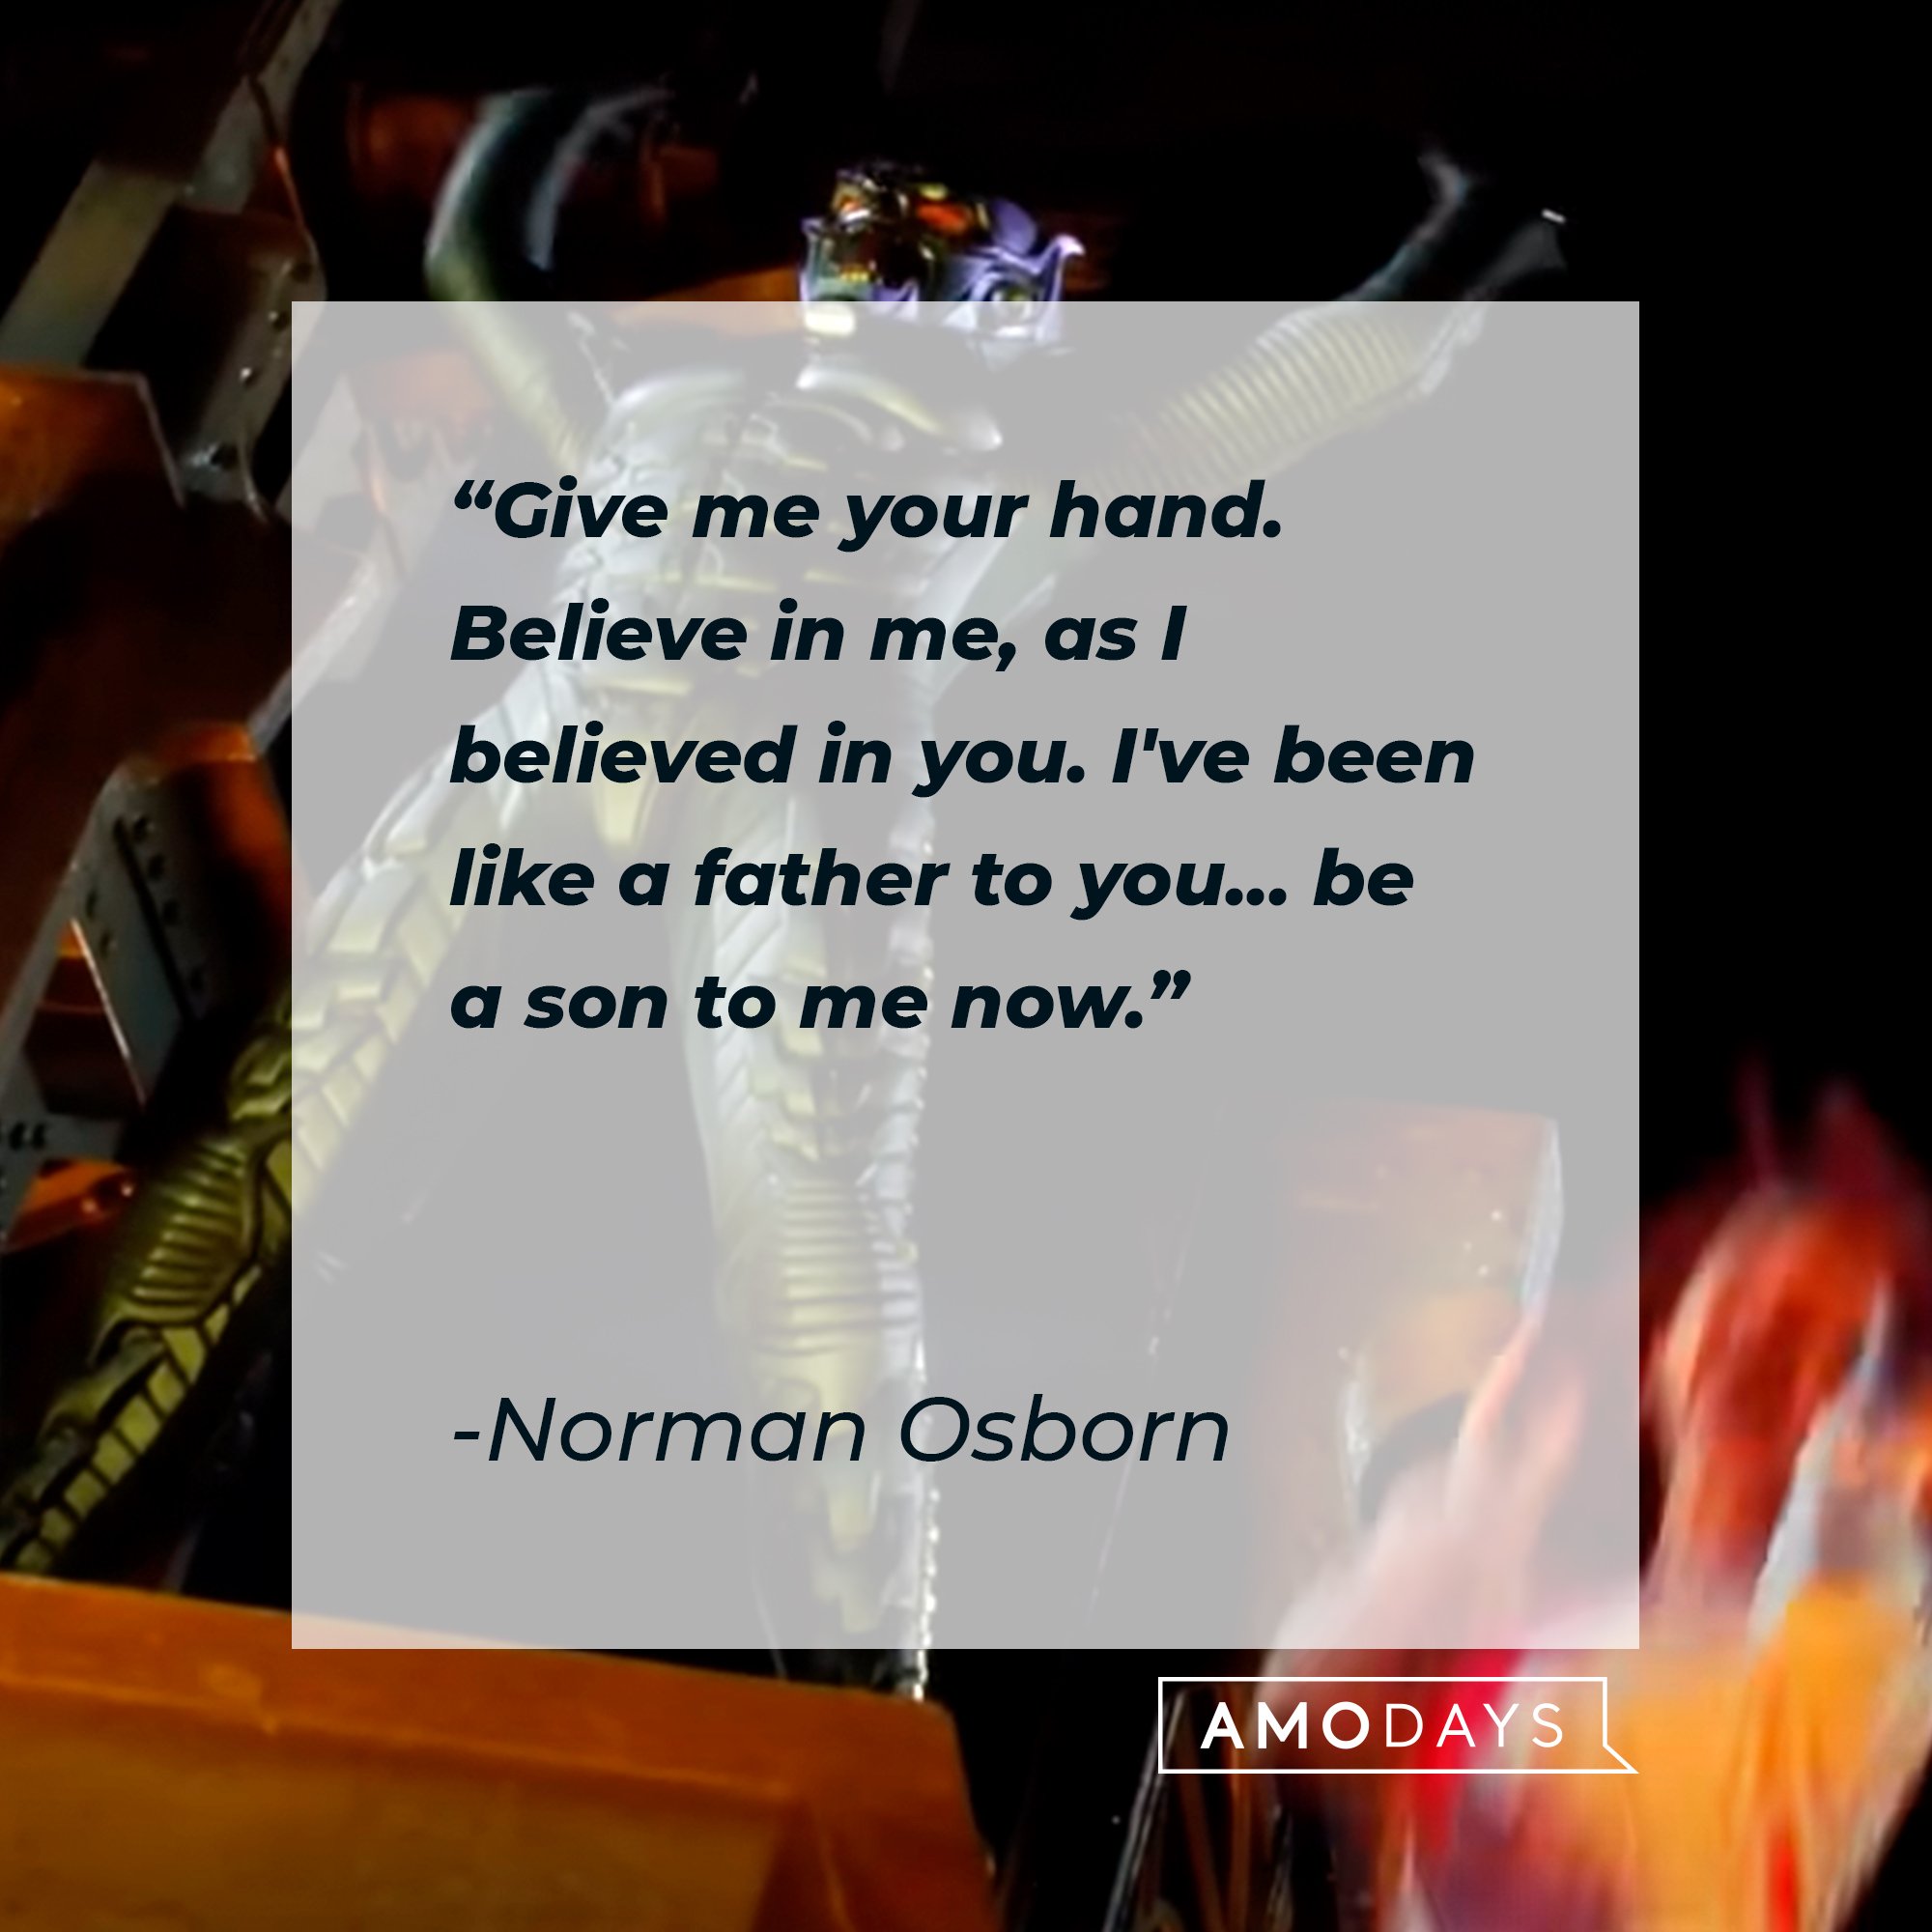 Norman Osborn’s quote: “Give me your hand. Believe in me, as I believed in you. I've been like a father to you... be a son to me now.” | Image: AmoDays